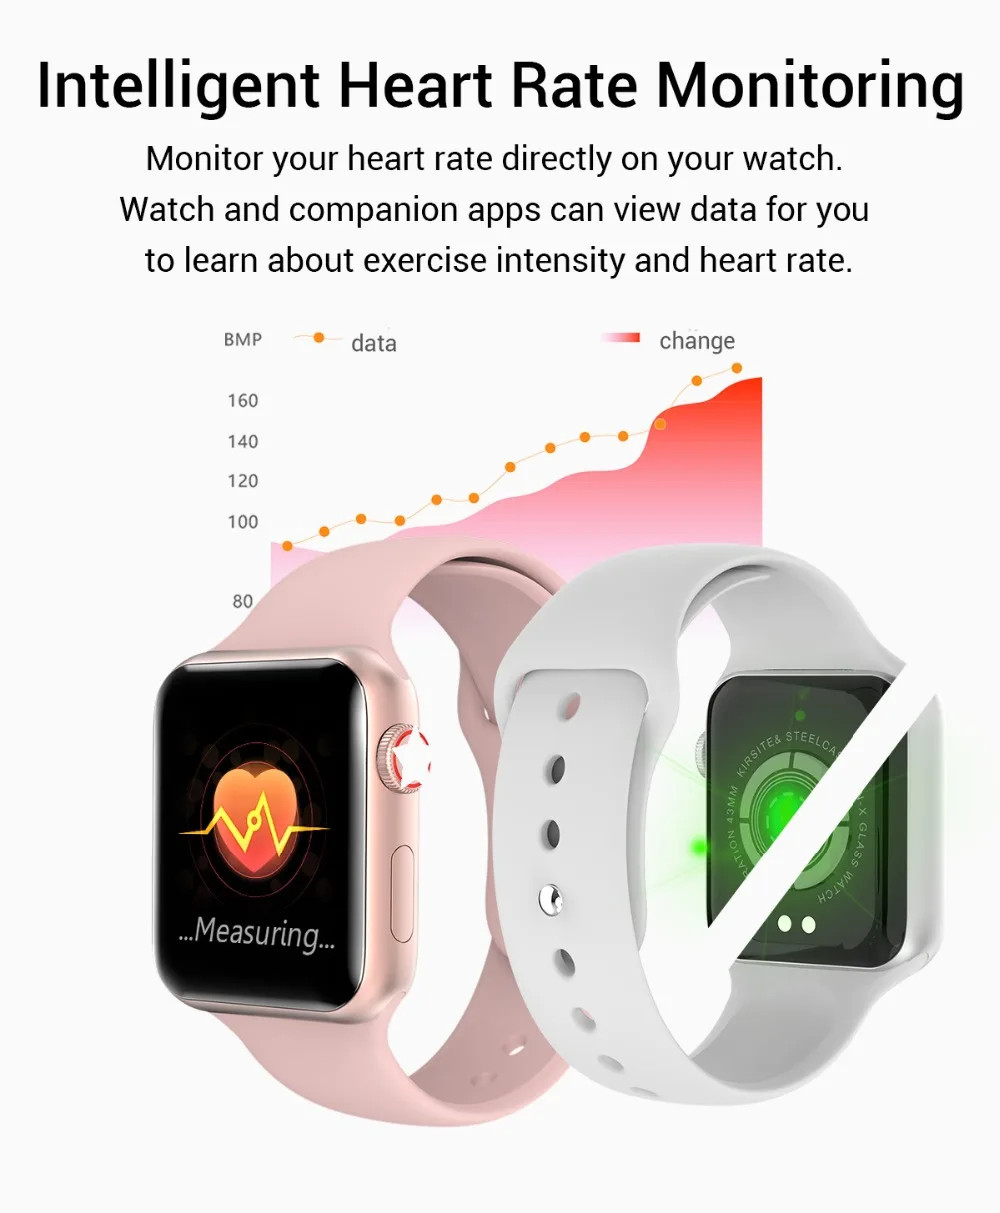 SmartWatch V6 Heart Rate Monitor waterproof Smart watch women man for IOS Apple iPhone Android phone PK watch 5 IWO 11/12 P68/70